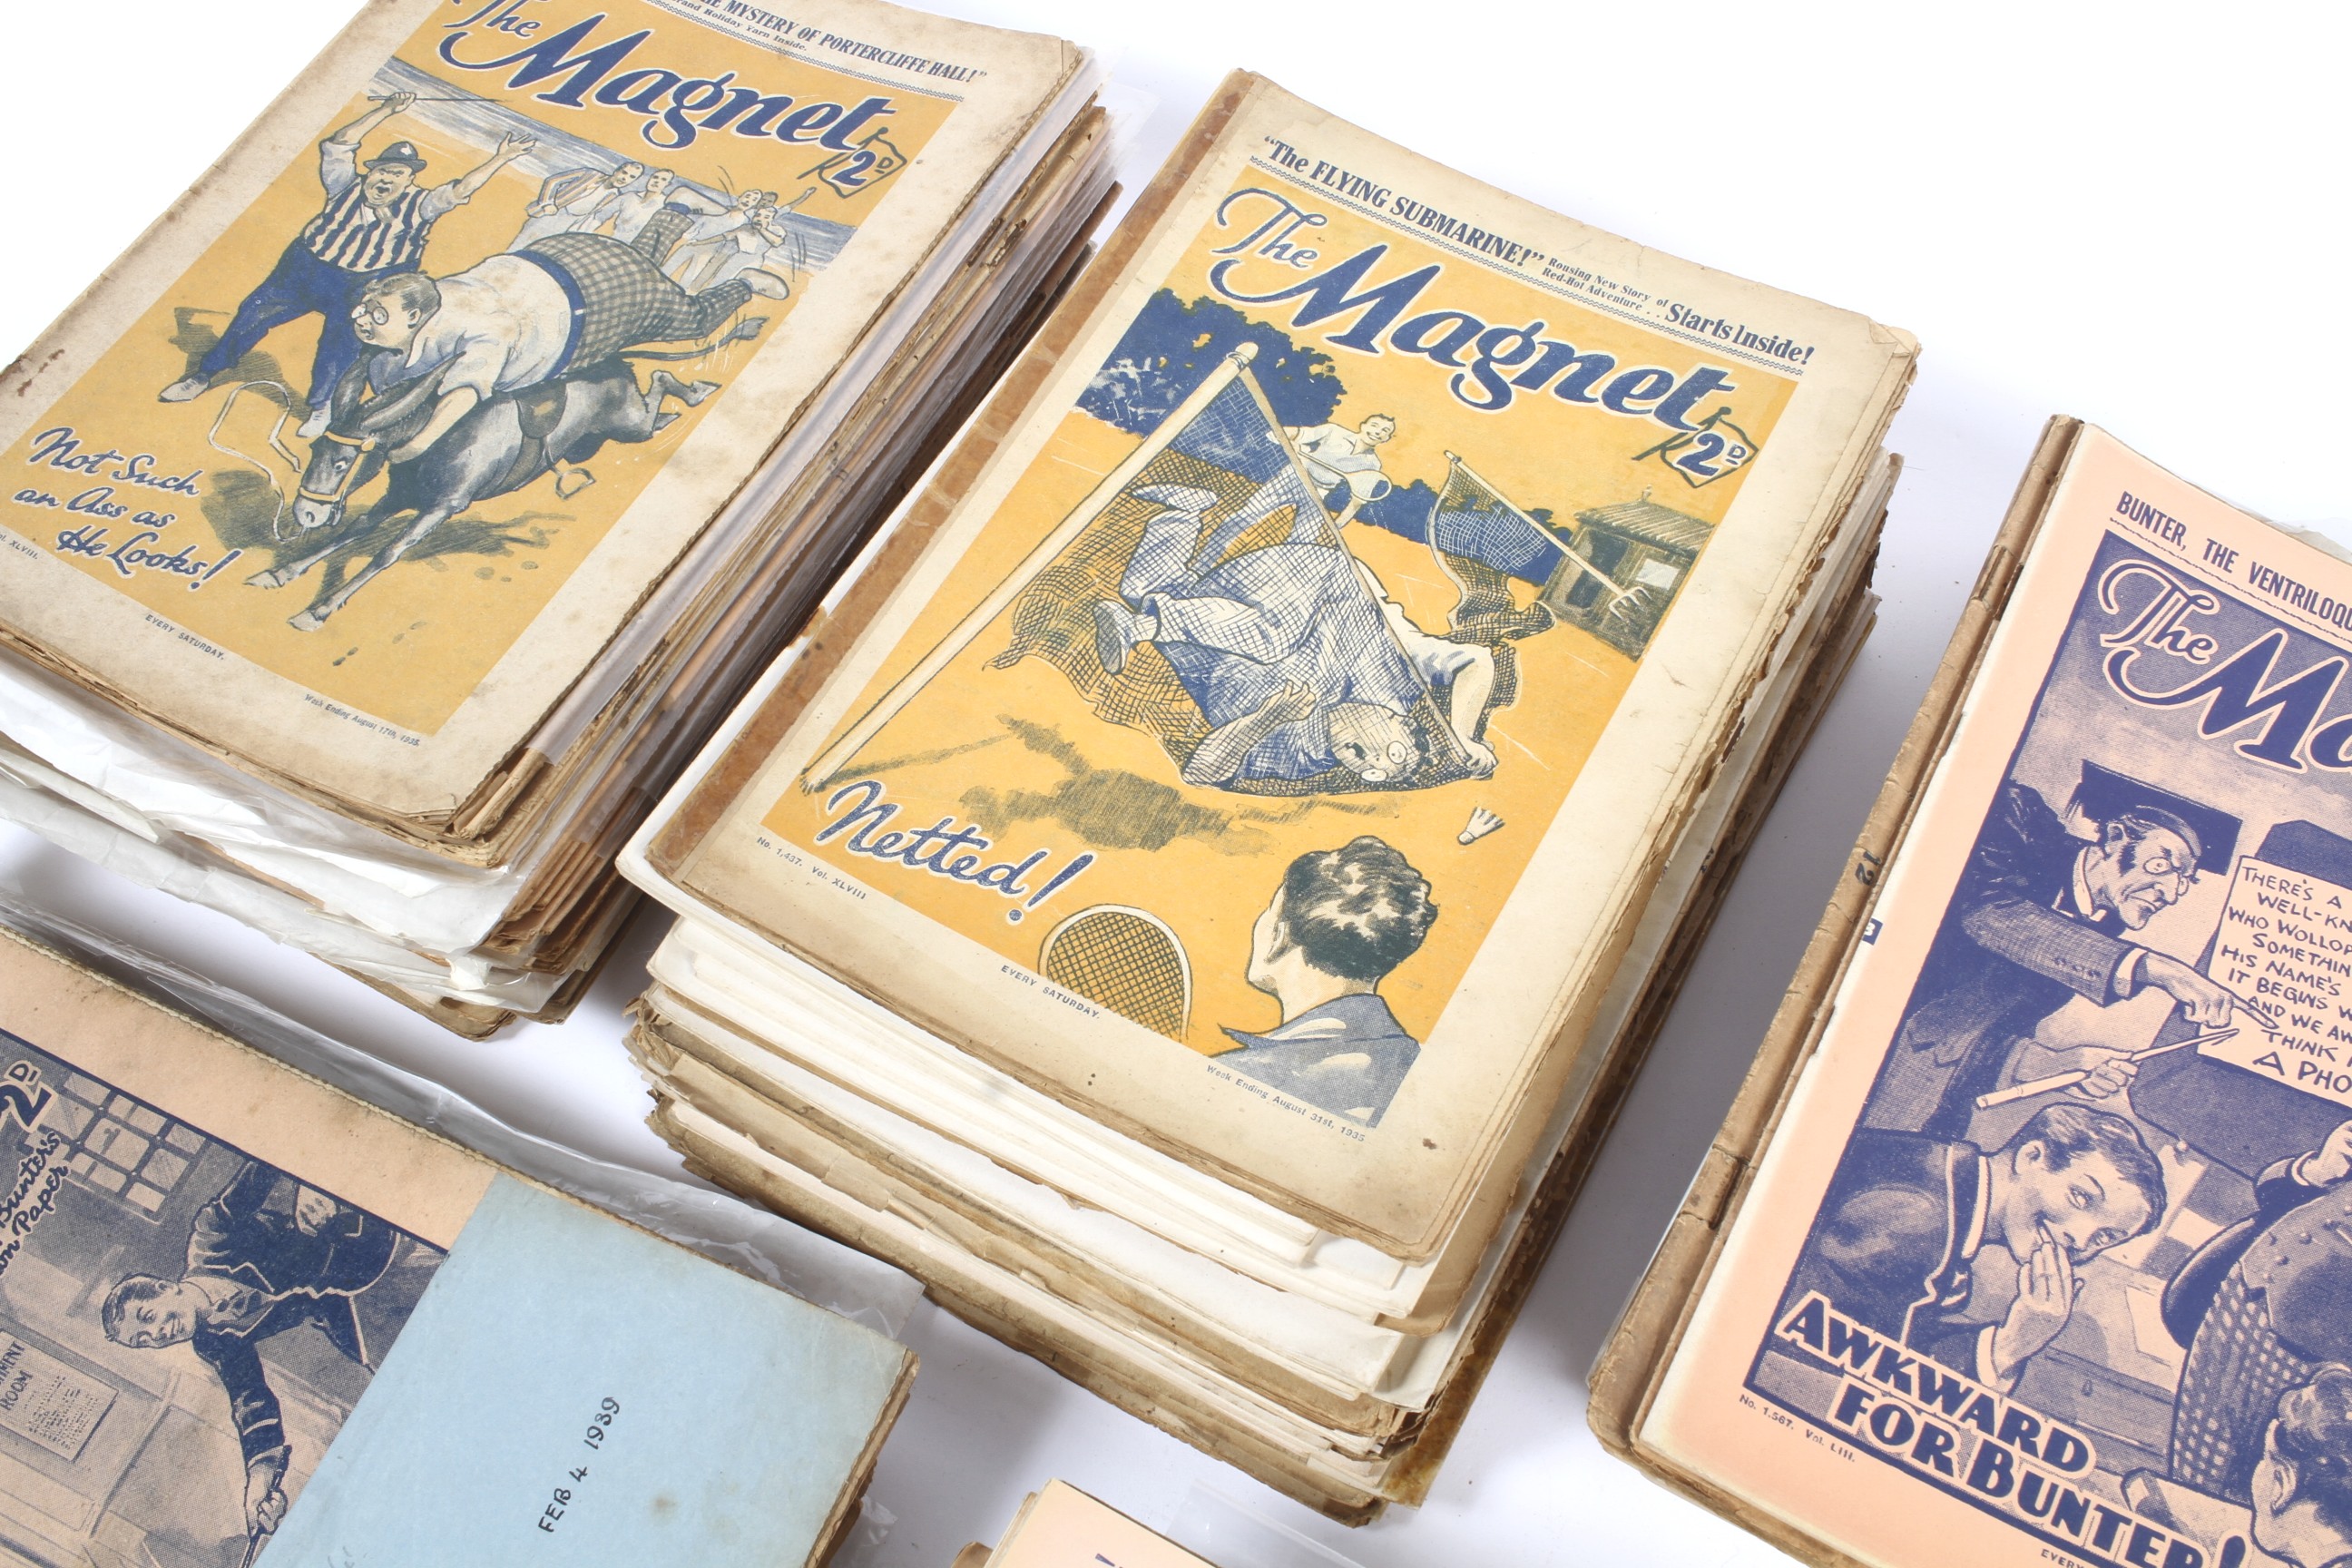 A comprehensive collection of 'The Magnet' vintage magazine, circa 1930. - Image 2 of 2